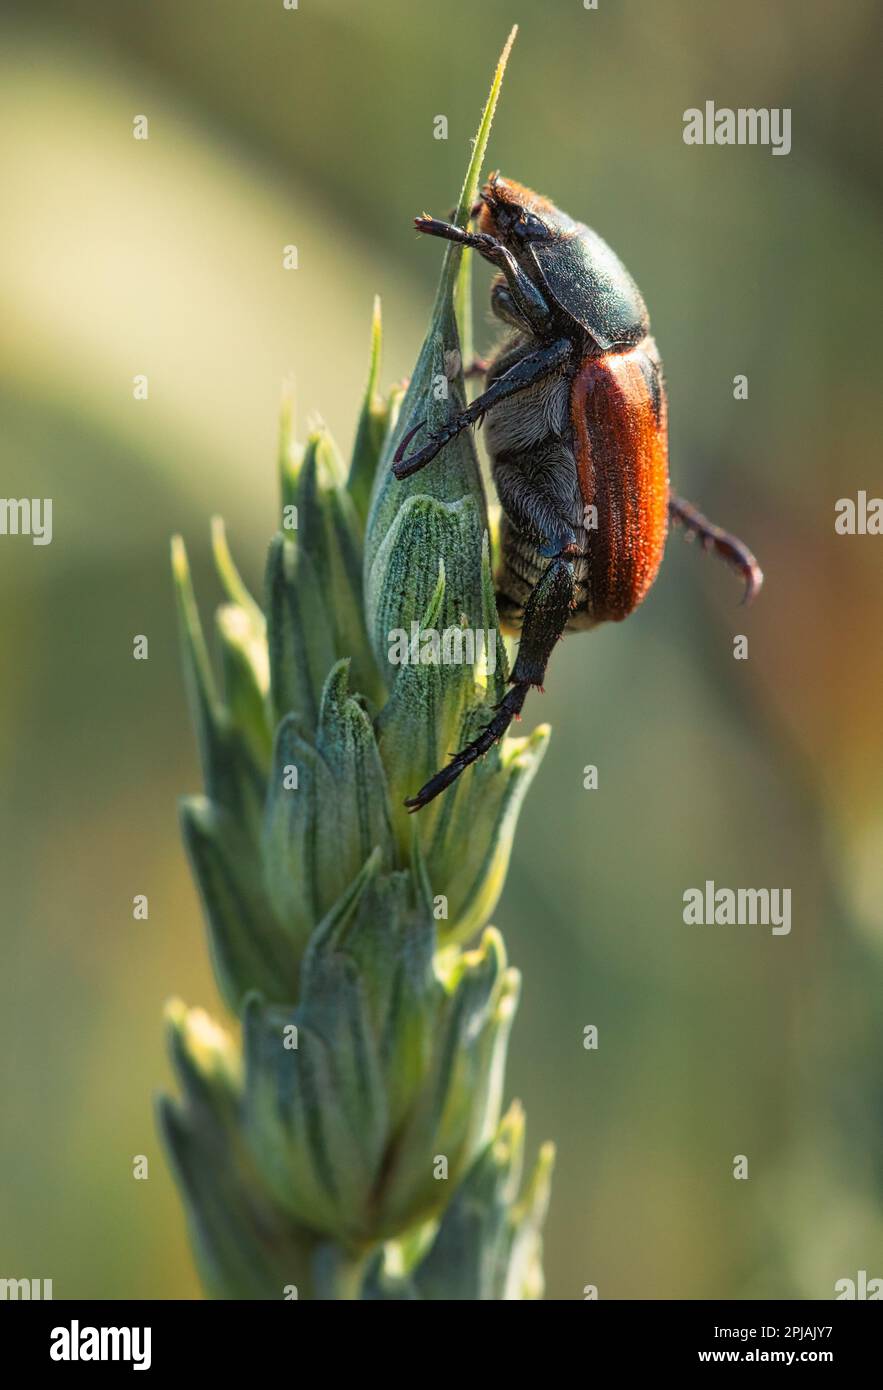 Explore the fascinating macro world with this close-up of Sitophilus granarius on a wheat stalk. The intricate detail and textures of the insect and t Stock Photo